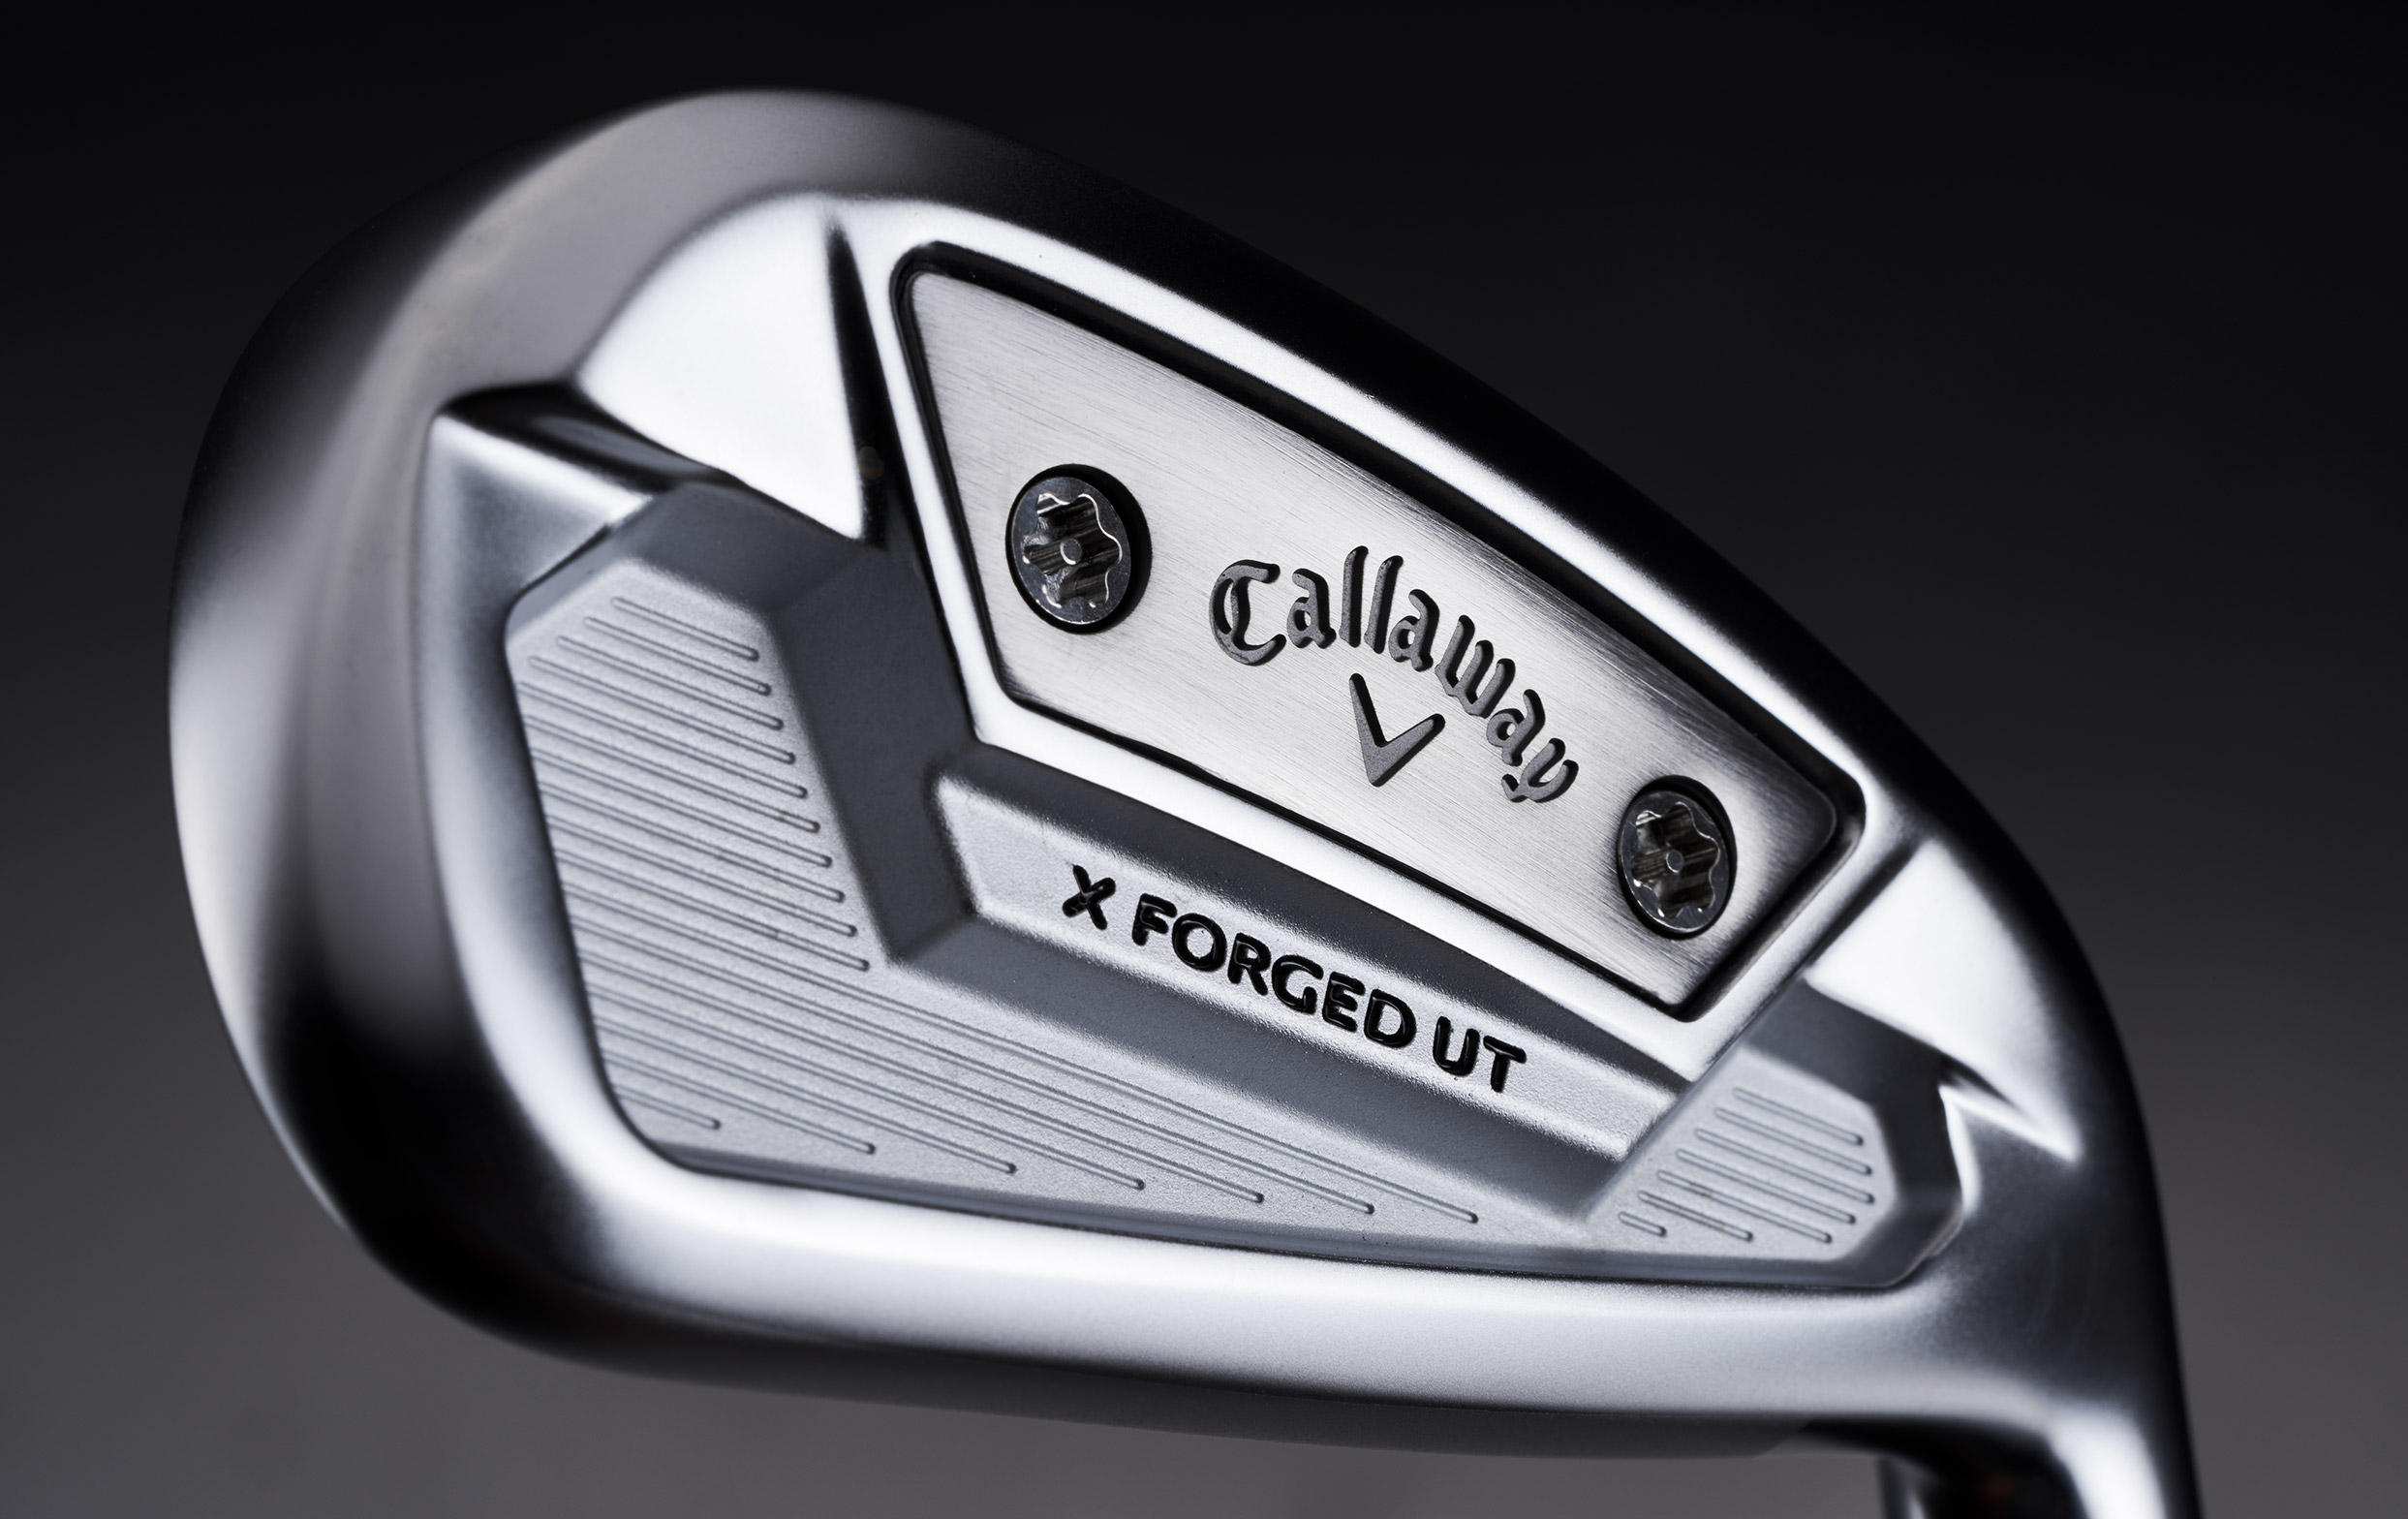 X Forged Utility Irons | Callaway Golf | Driving Irons